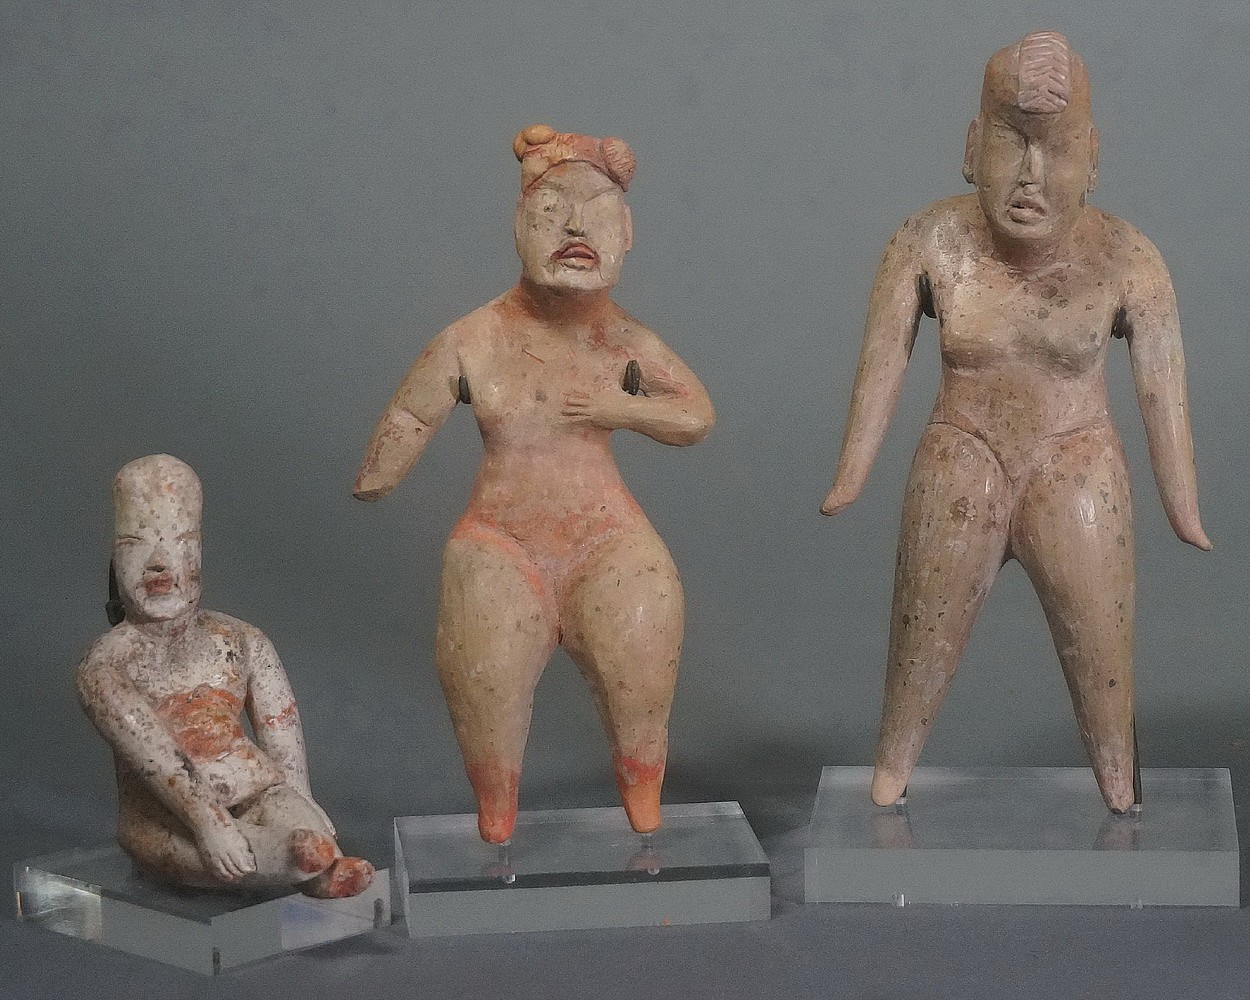 wastefully turn around wire Mexico | Set of 3 Olmec Ceramic Figurines | | David Bernstein Pre-Columbian  Art. Extensive inventory of Pre-Columbian art from South America, including  ancient objects in ceramic, textiles, bronze, copper and gold.